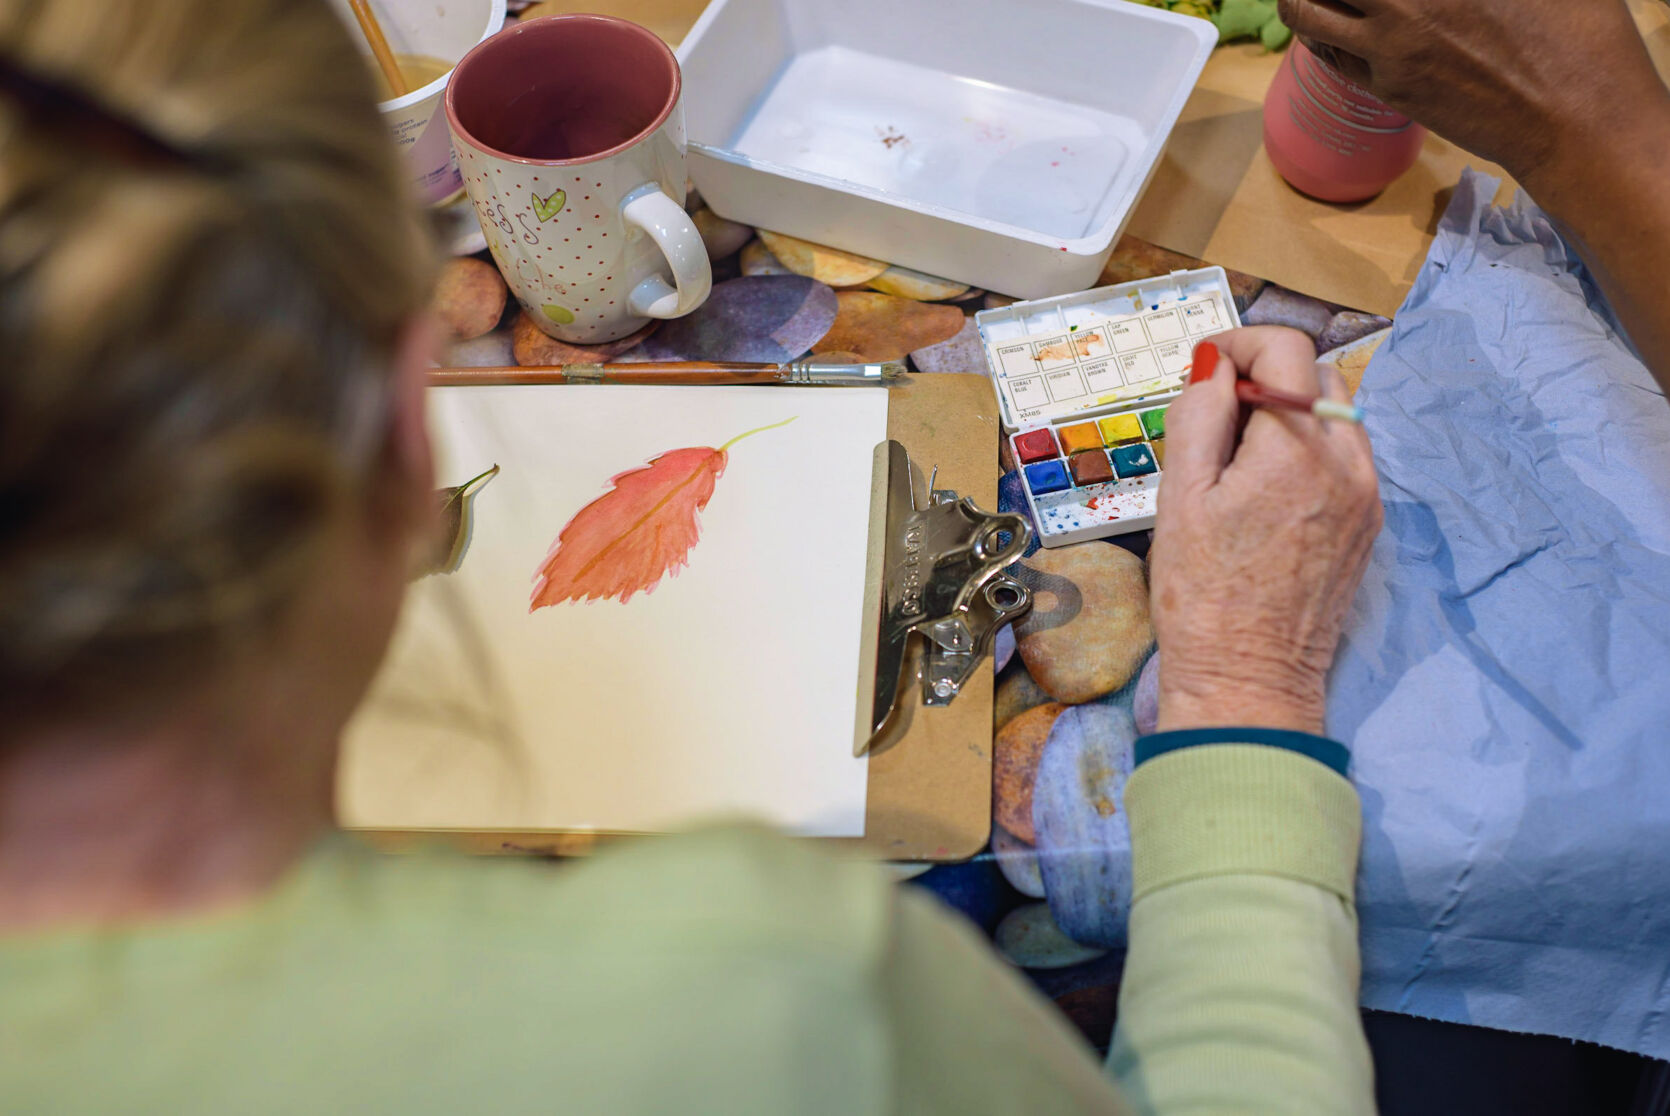 A person seen from behind and overhead, painting a picture of a leaf. They are surrounded by art supplies and a mug.